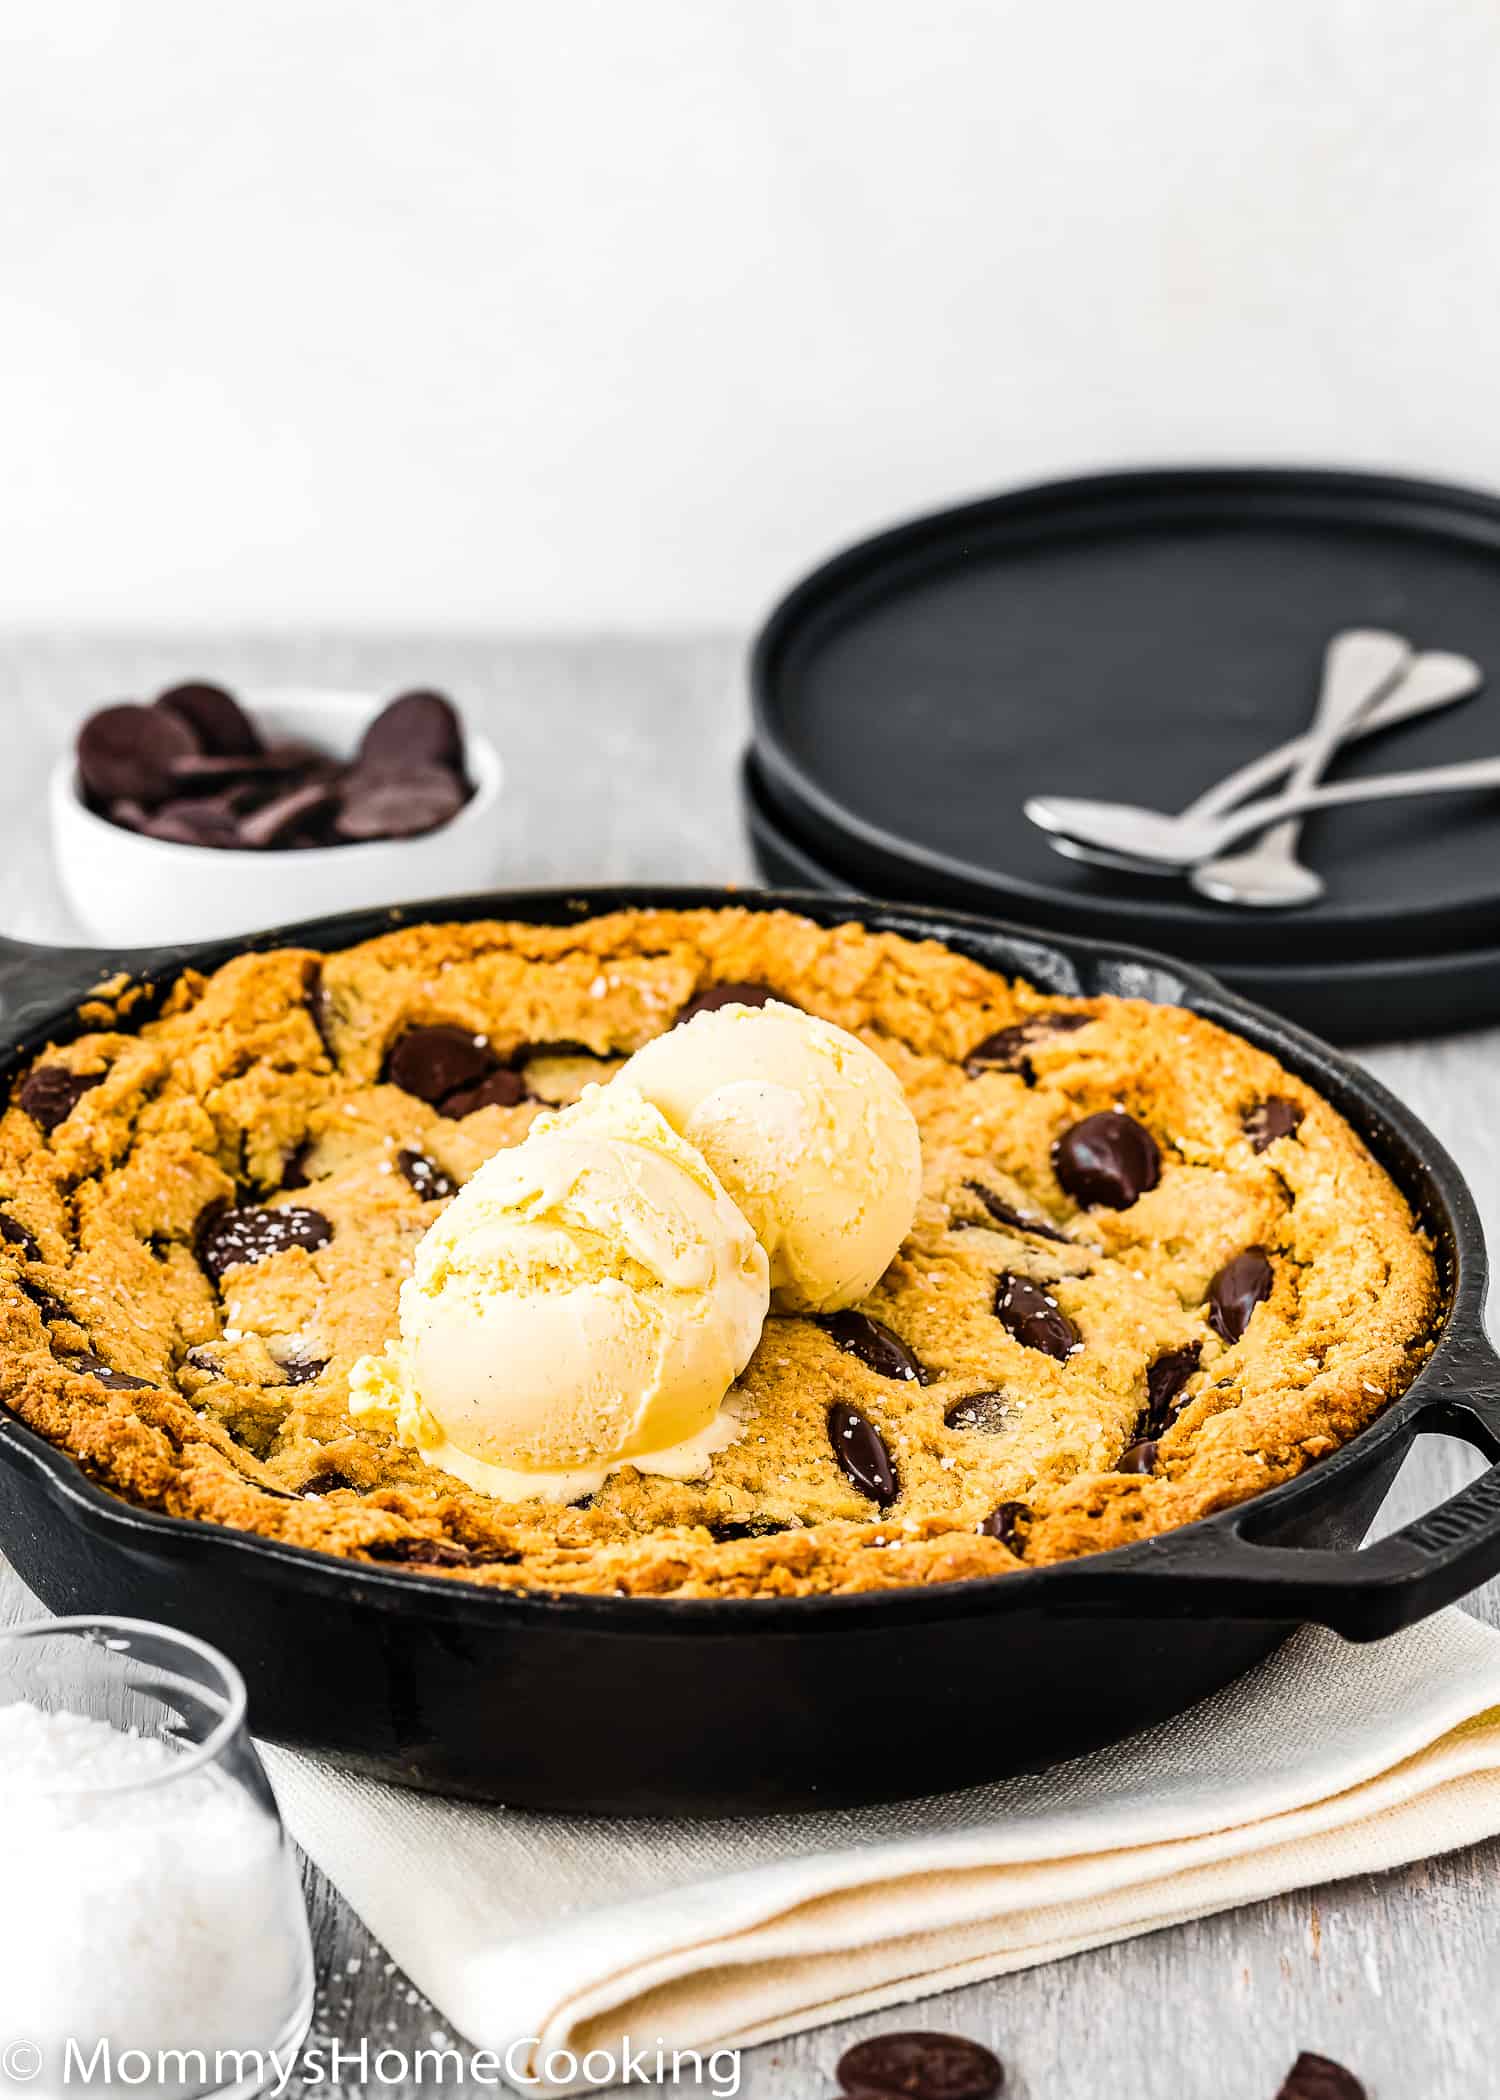 Eggless Chocolate Chip Skillet Cookie with two black plates and dessert spoons in the background.